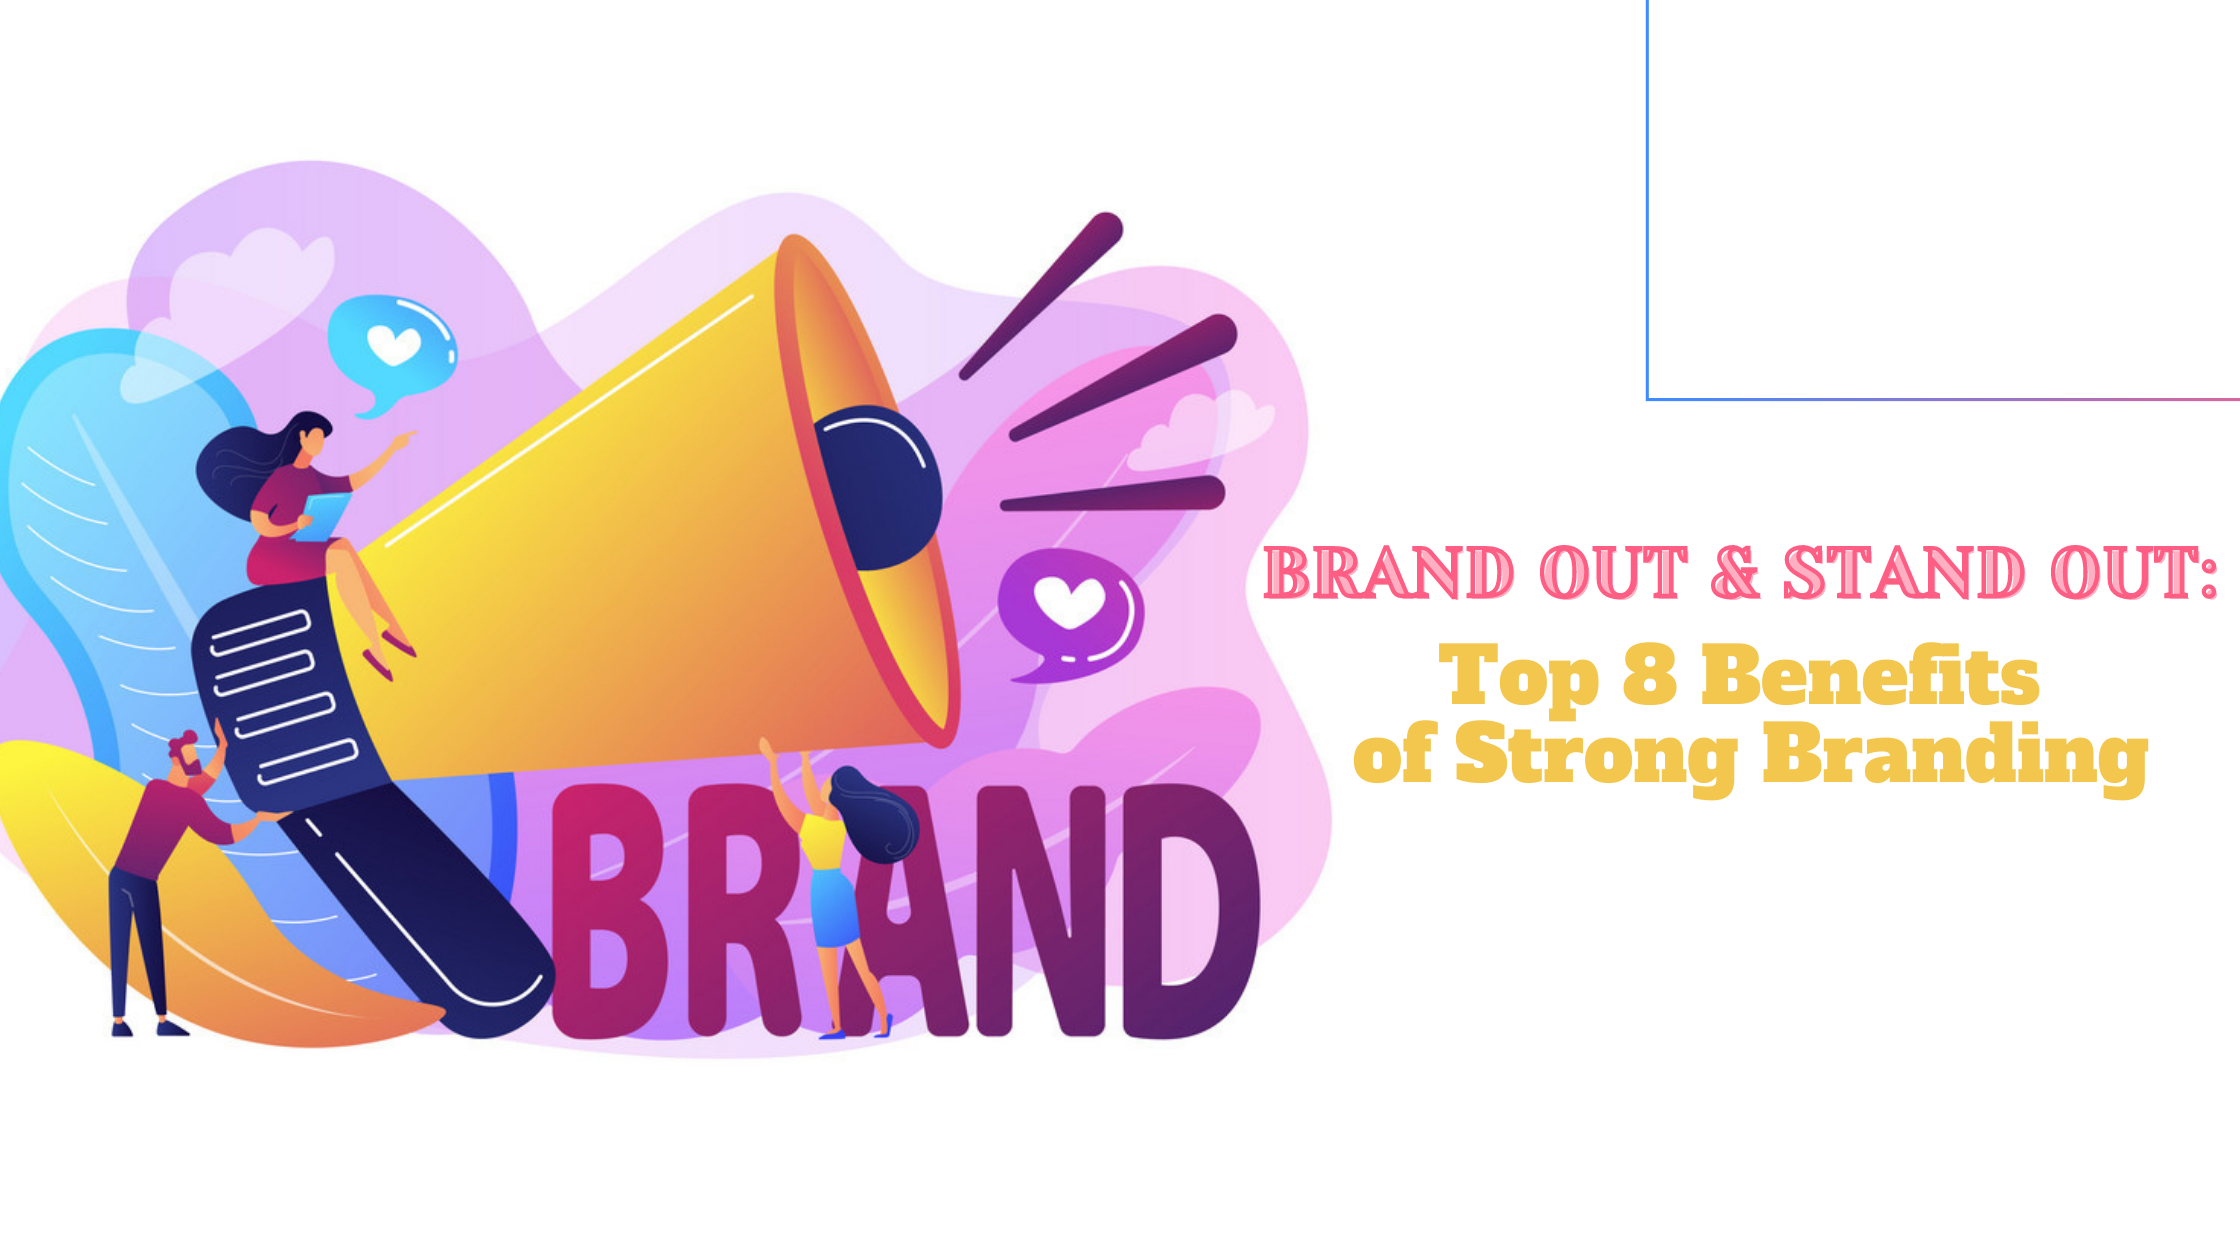 Brand Out & Stand Out_ Top 8 Benefits of Strong Branding